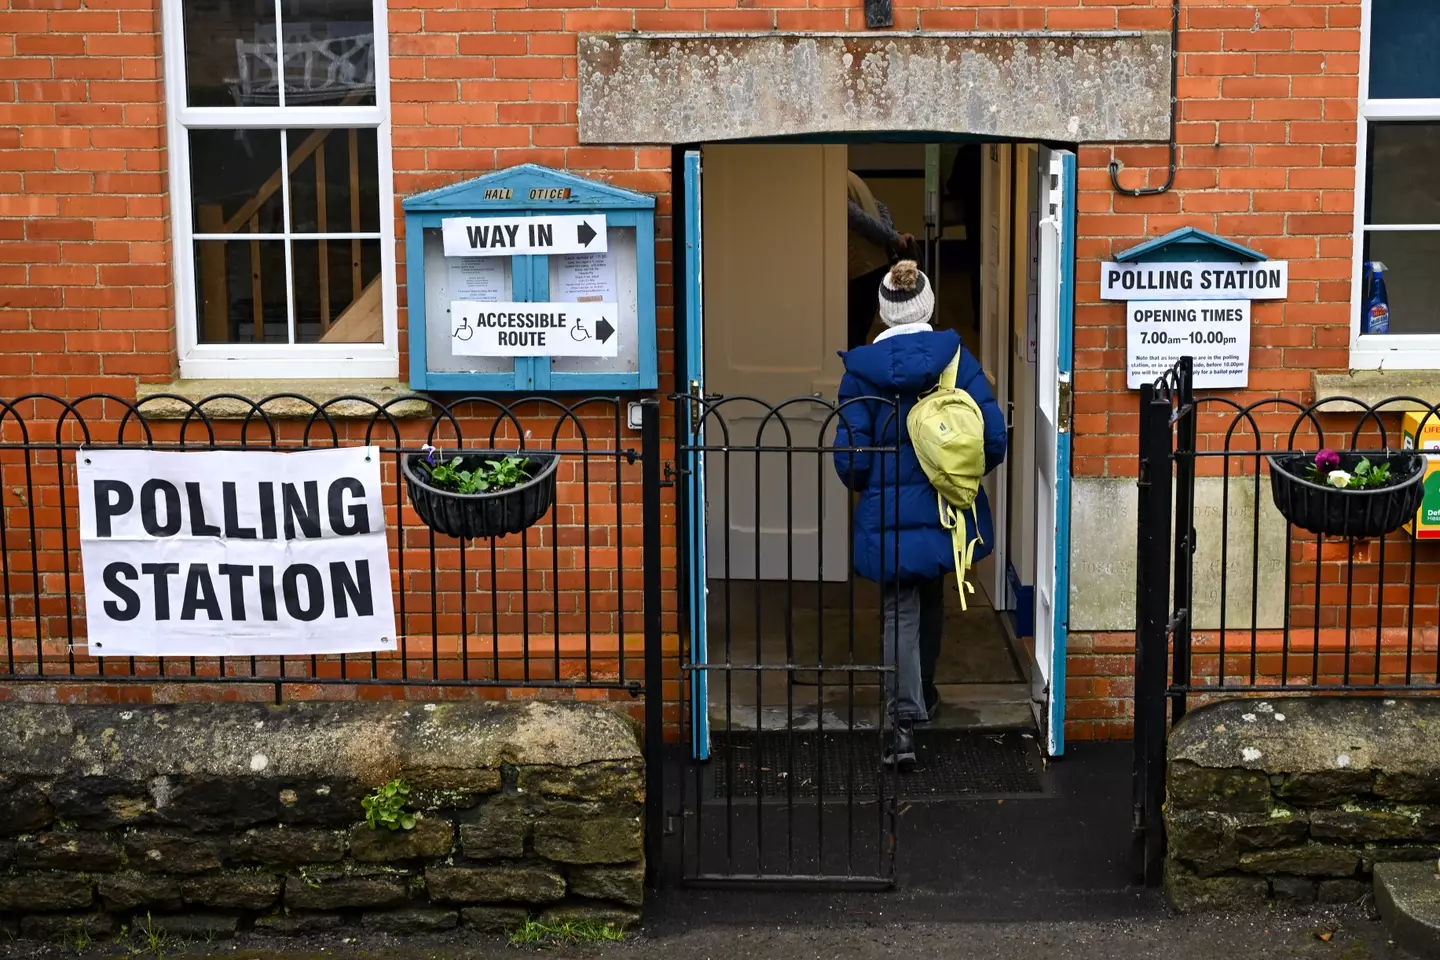 Polling stations are open from 7am to 10pm, and there are usually signs pointing you in the right direction. (Finnbarr Webster/Getty Images)